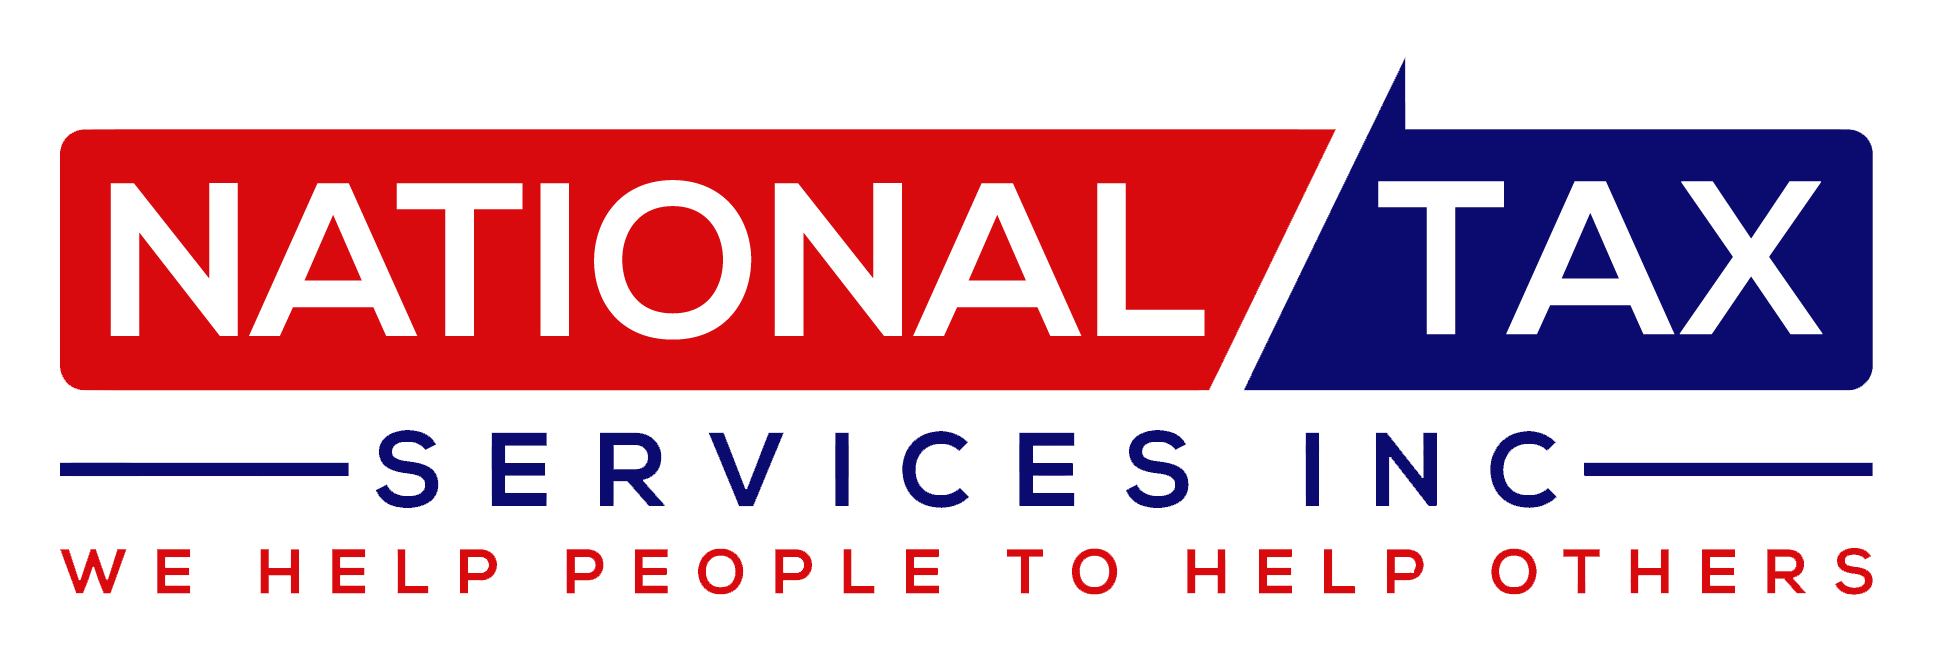 National Tax Services Inc.